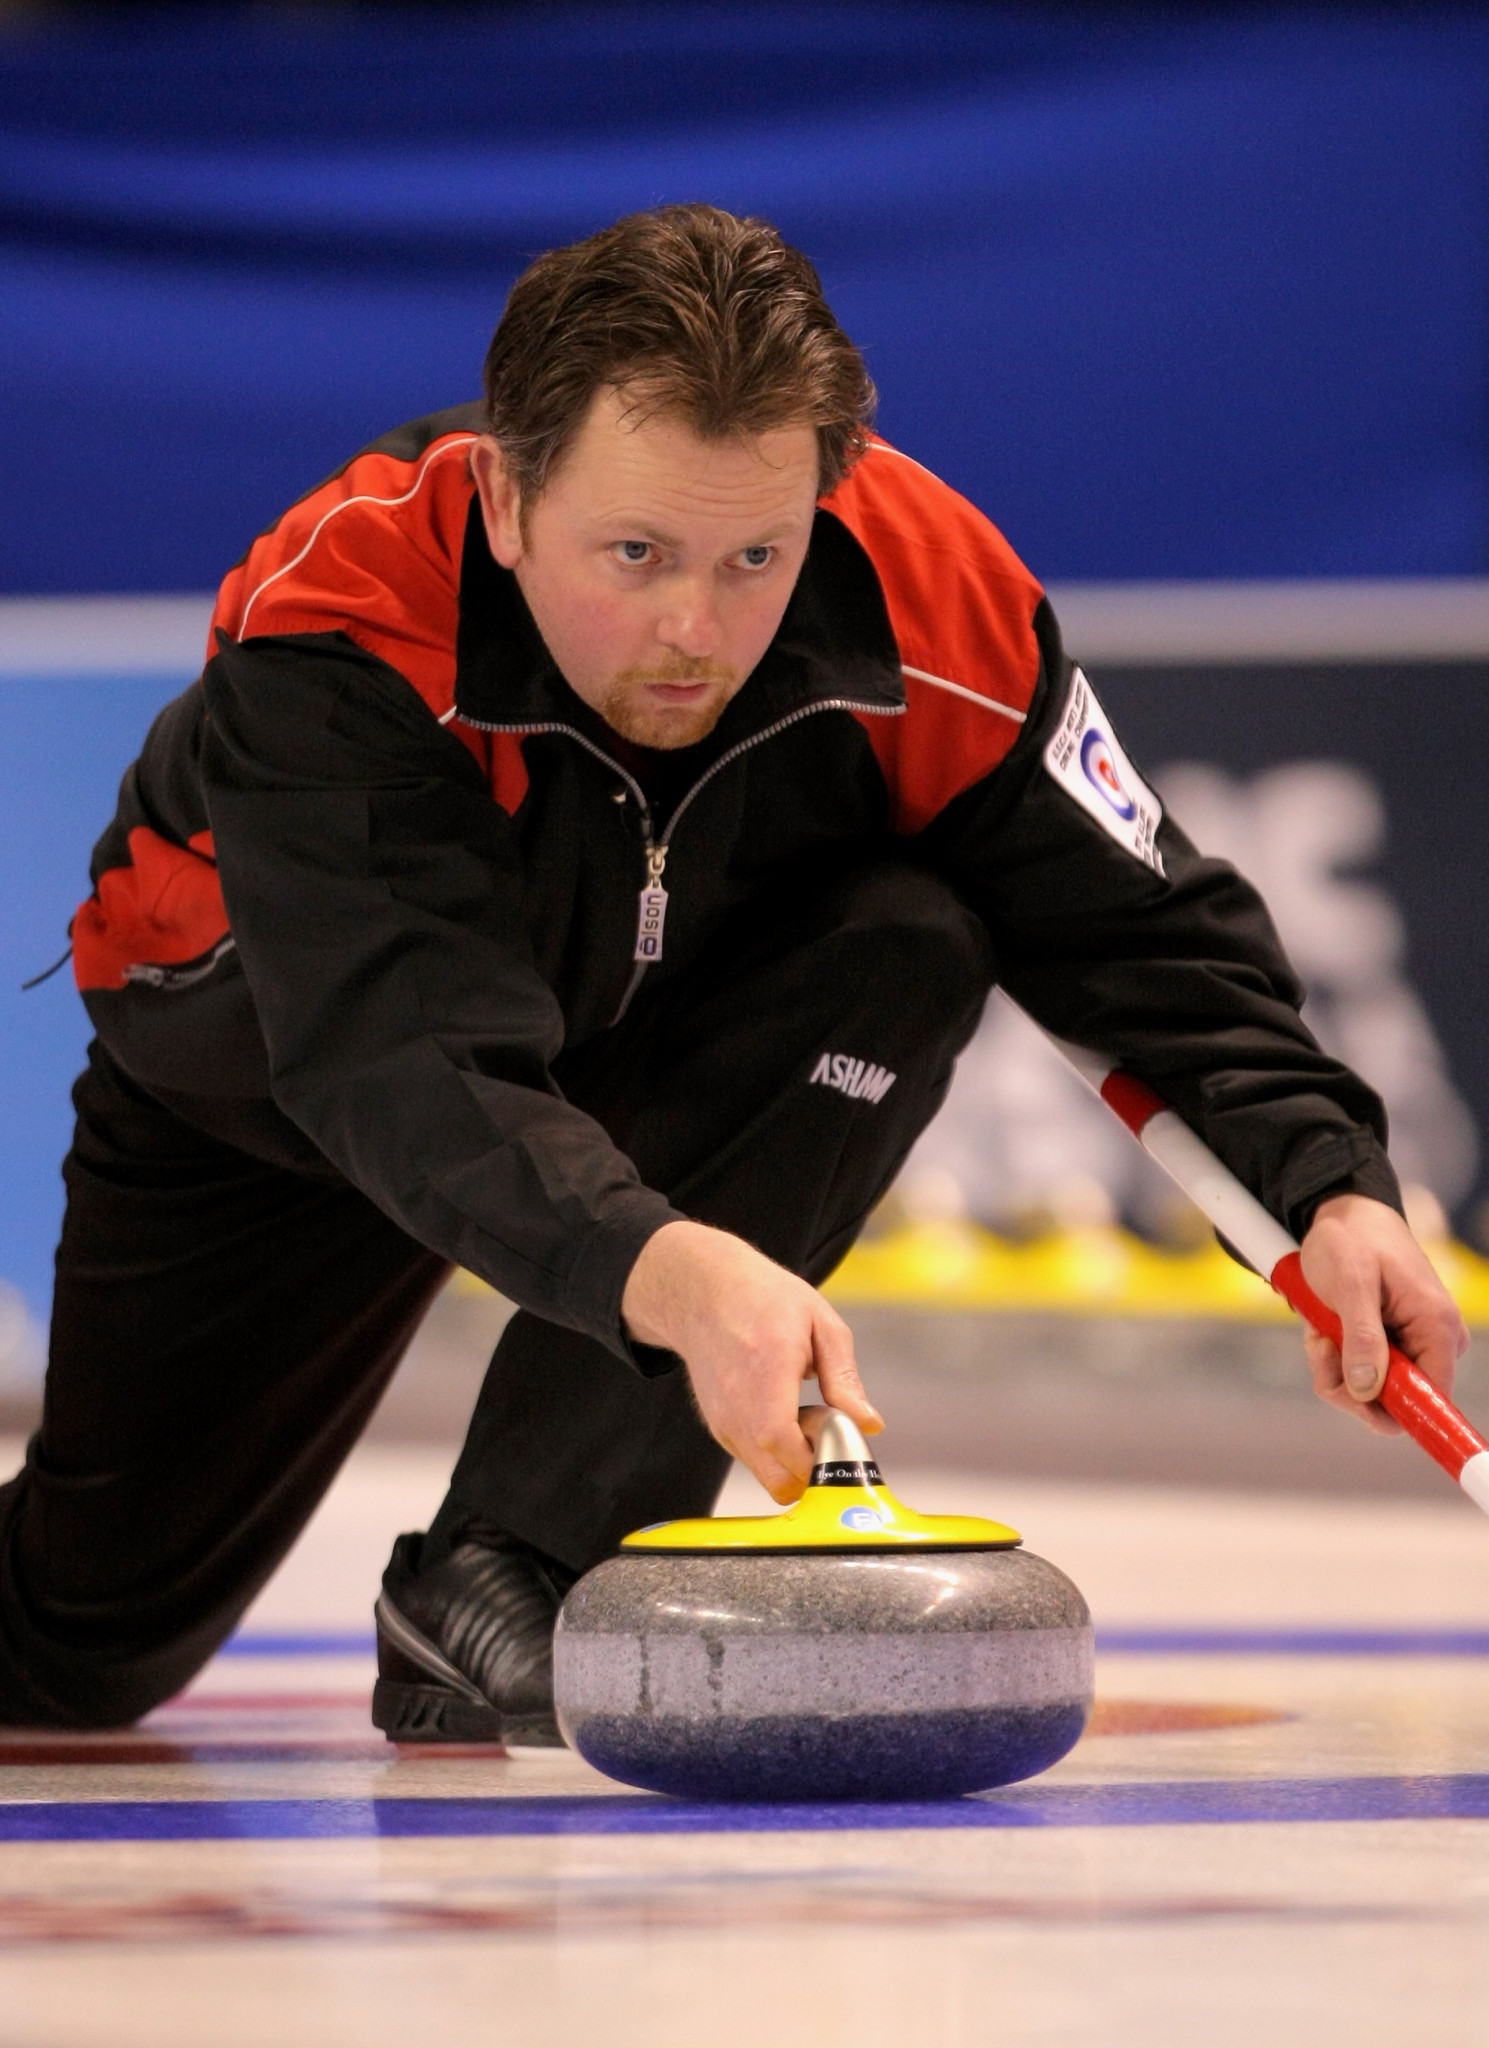 Birr and McCormick to go head-to-head in a shoot-out to see who will face Shuster at US Olympic Curling Trials